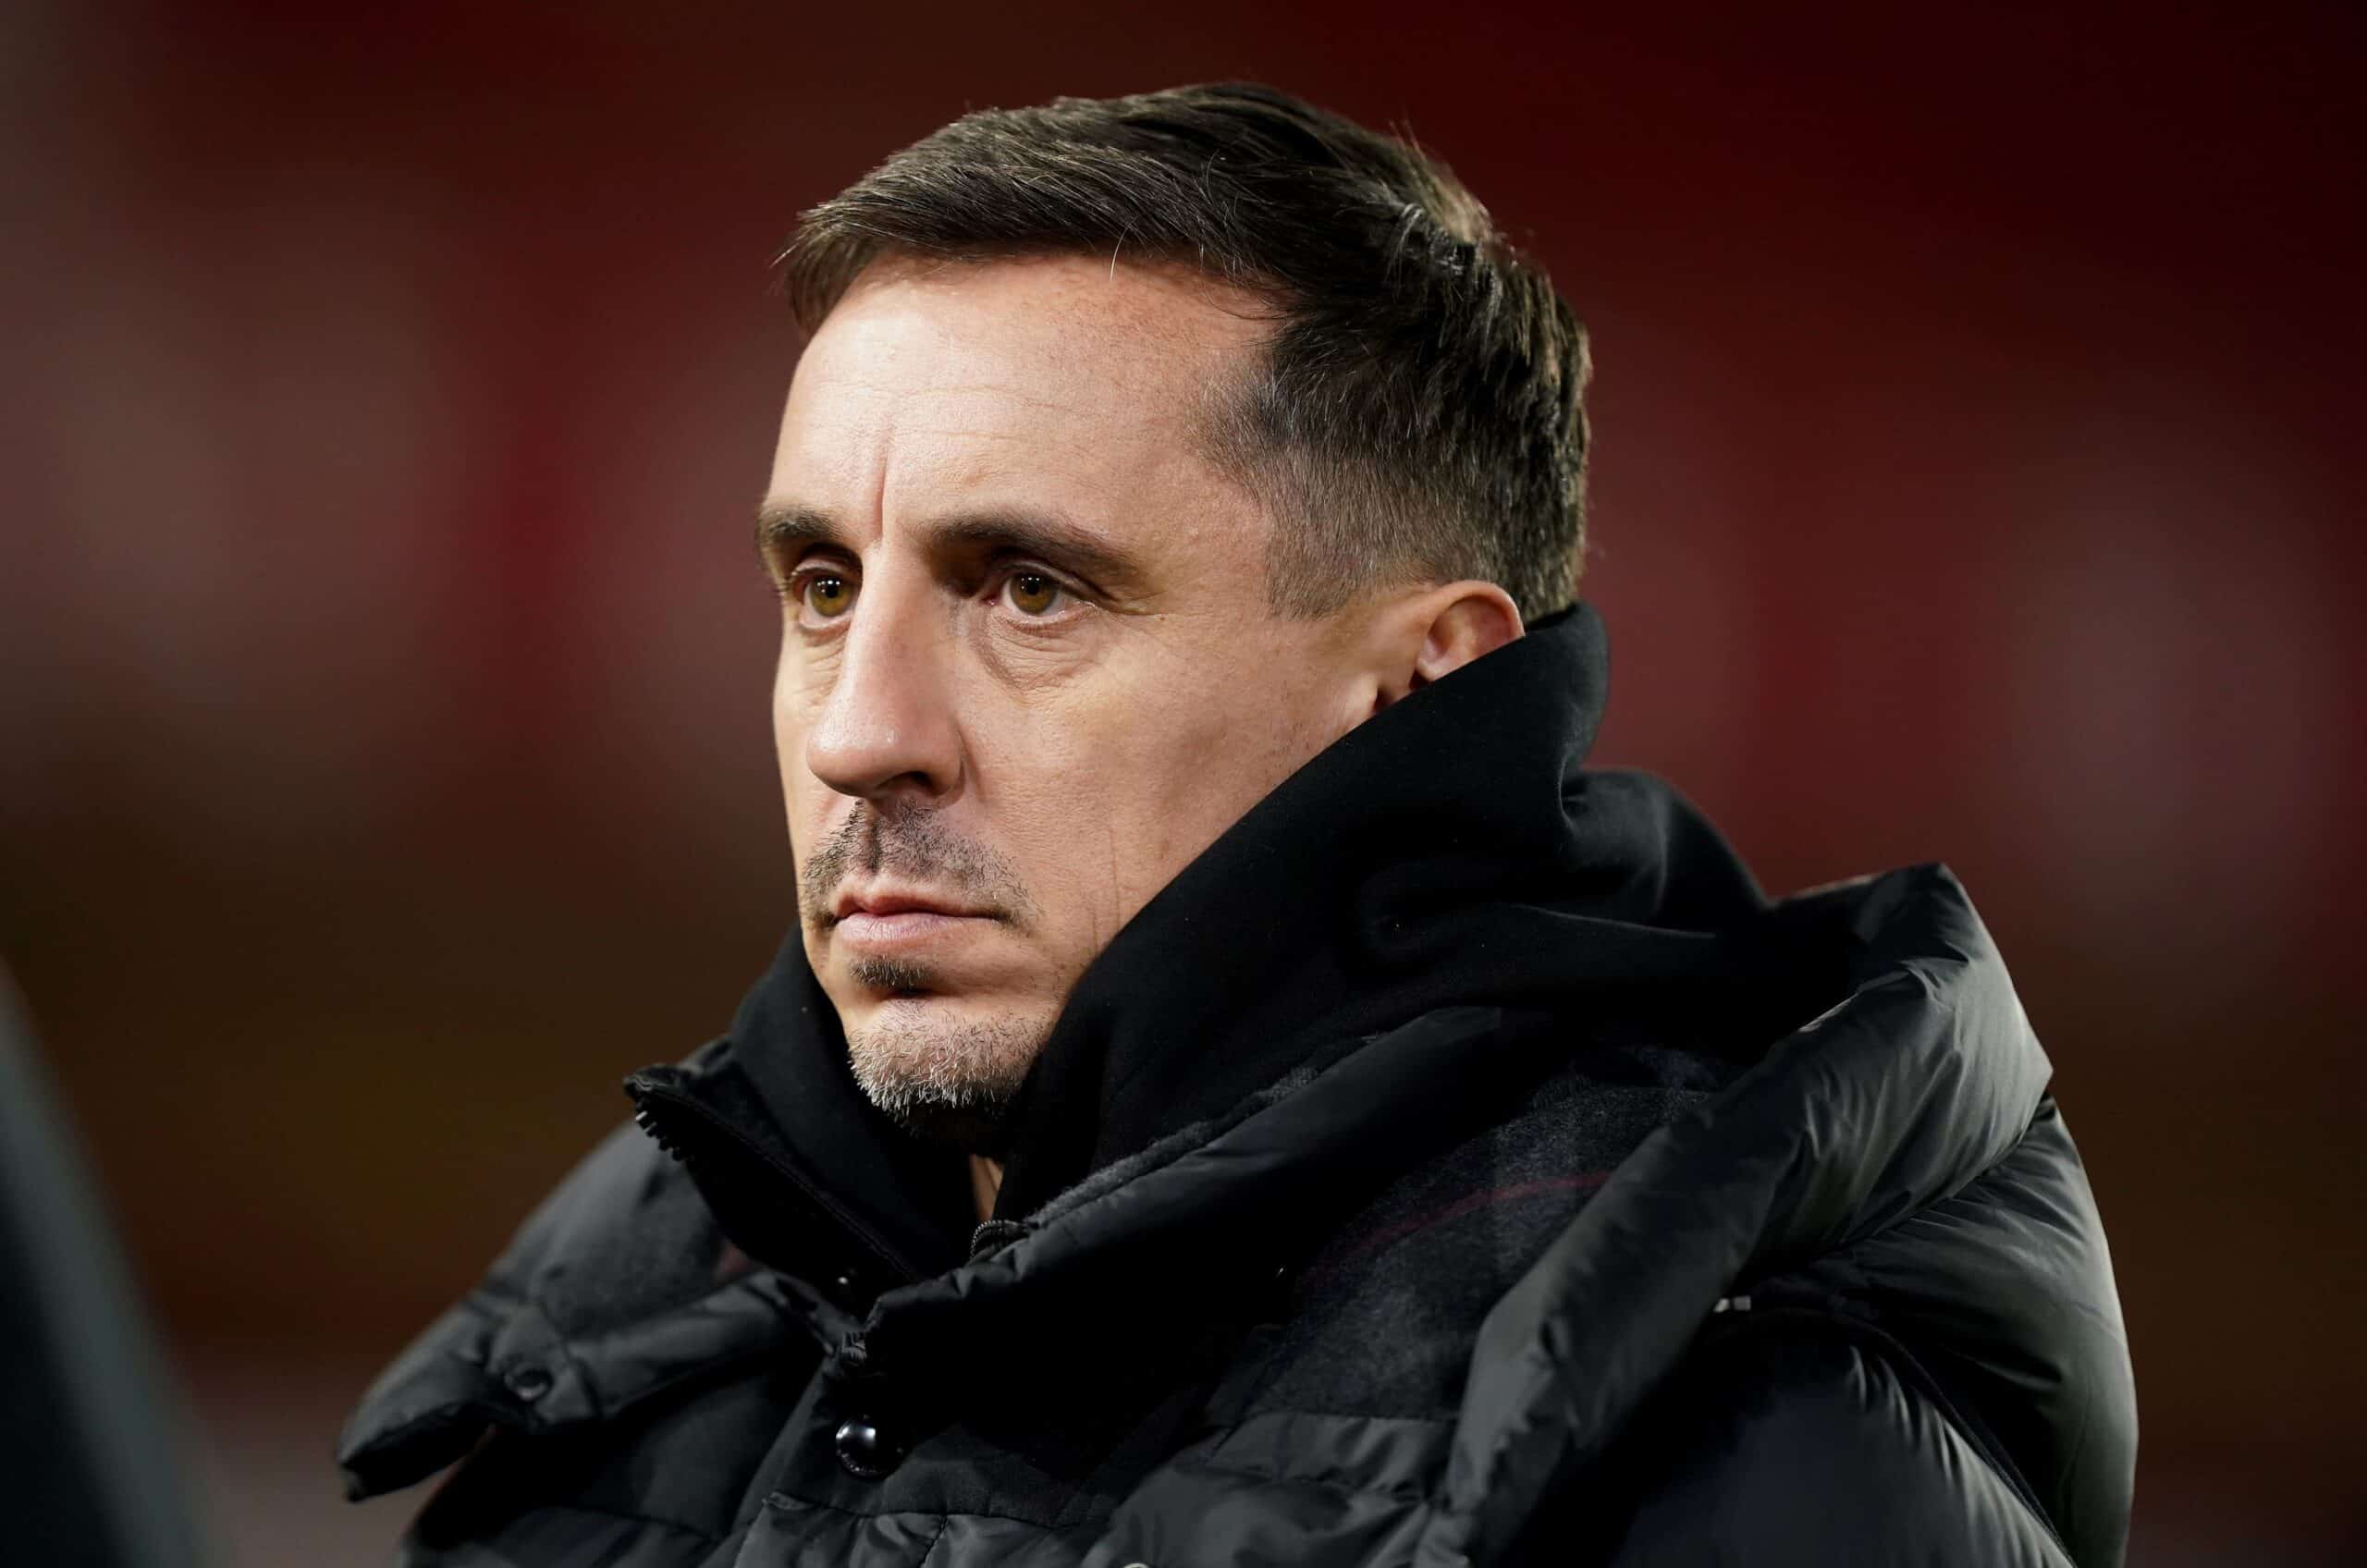 Gary Neville says ‘unusual things’ have happened to him after Boris Johnson criticism